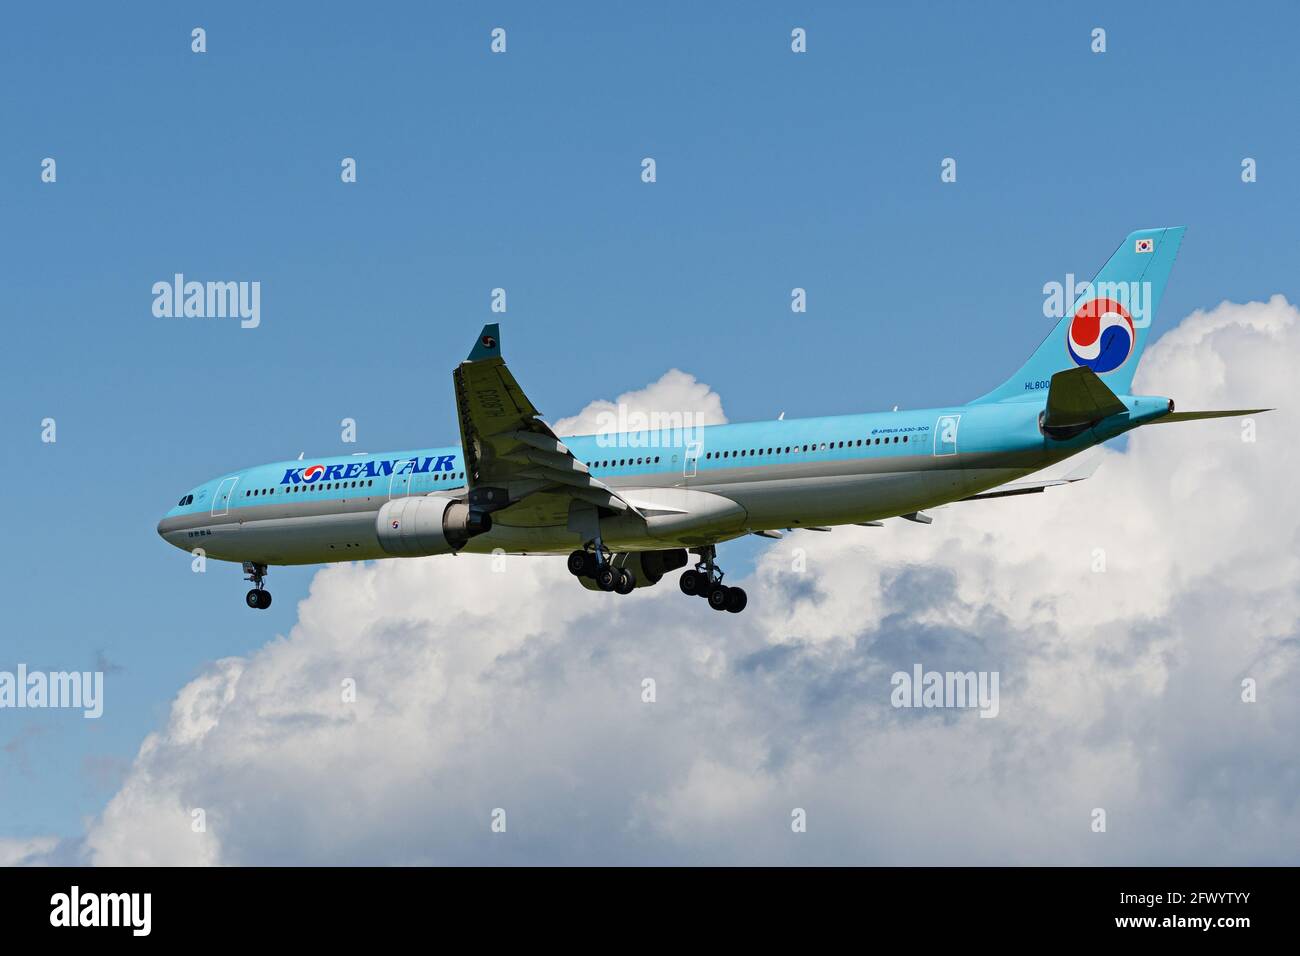 Richmond, British Columbia, Canada. 18th May, 2021. A Korean Air Airbus A330-300 jet (HL8003) airborne on final approach for landing at Vancouver International Airport. Credit: Bayne Stanley/ZUMA Wire/Alamy Live News Stock Photo